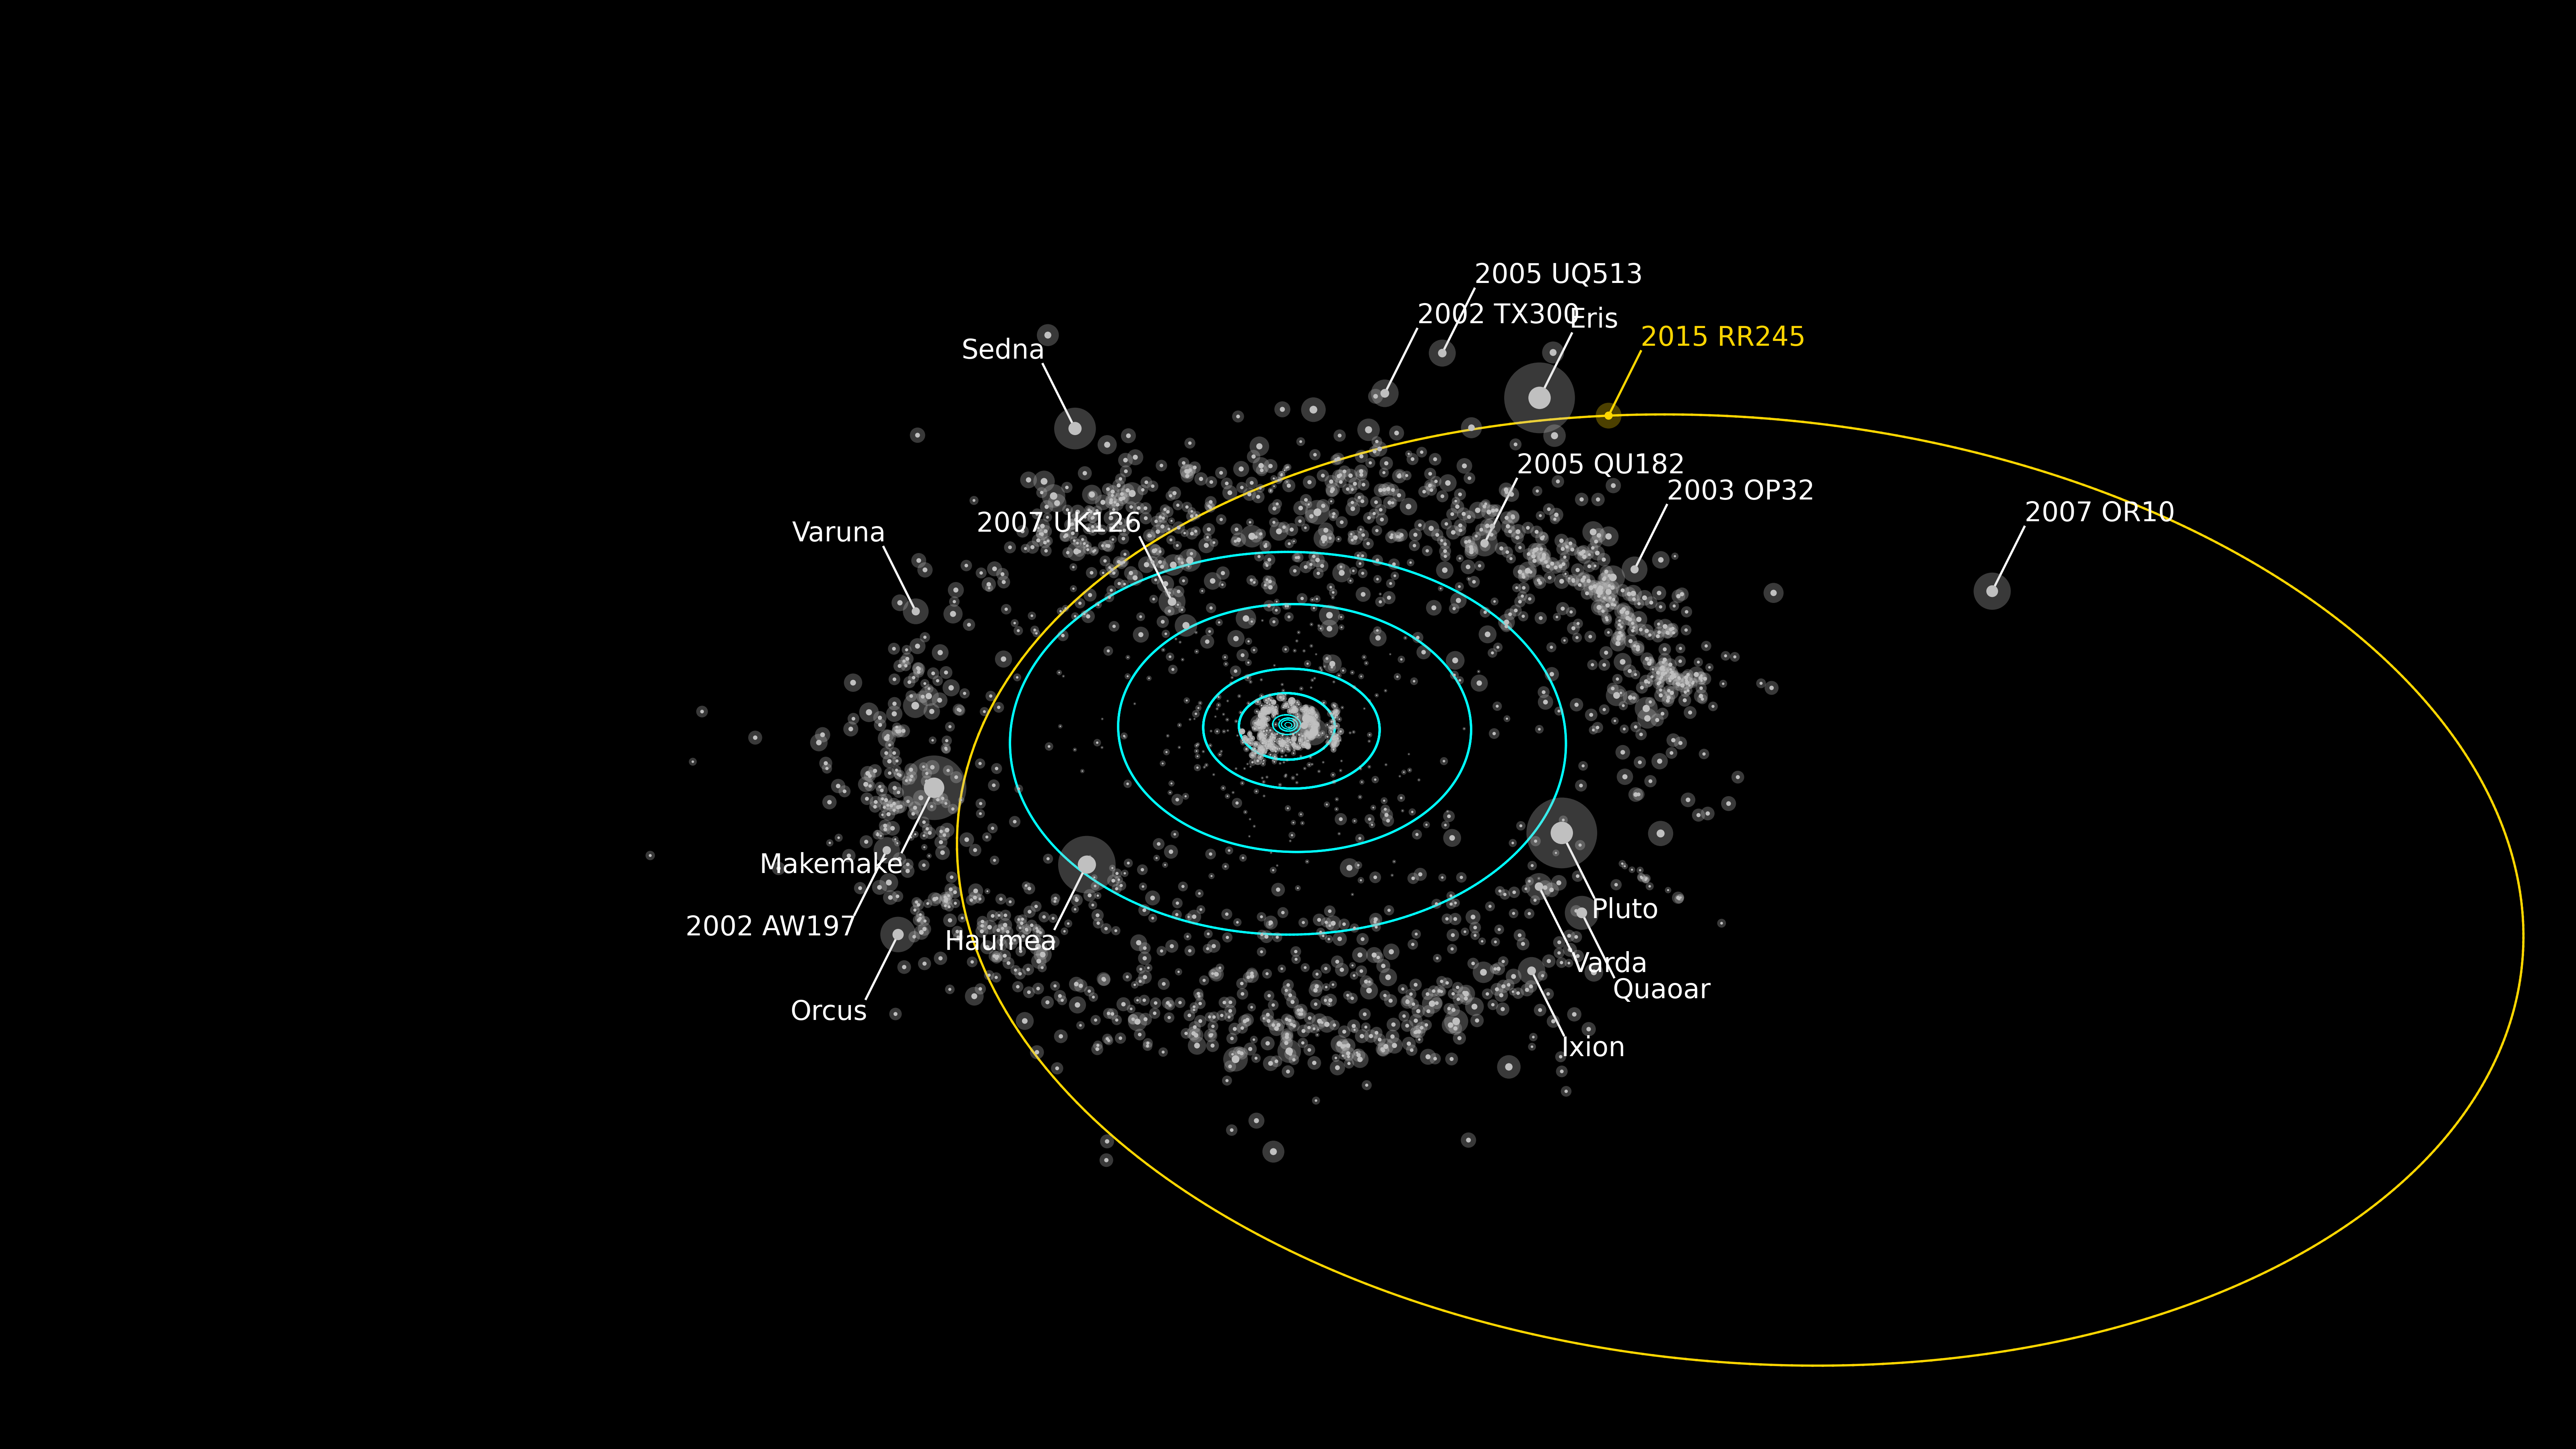 Rendering of the orbit of RR245 (orange line). Objects as bright or brighter than RR245 are labeled. The Minor Planet Center describes the object as the 18th largest in the Kuiper Belt. Credit: Alex Parker OSSOS team.